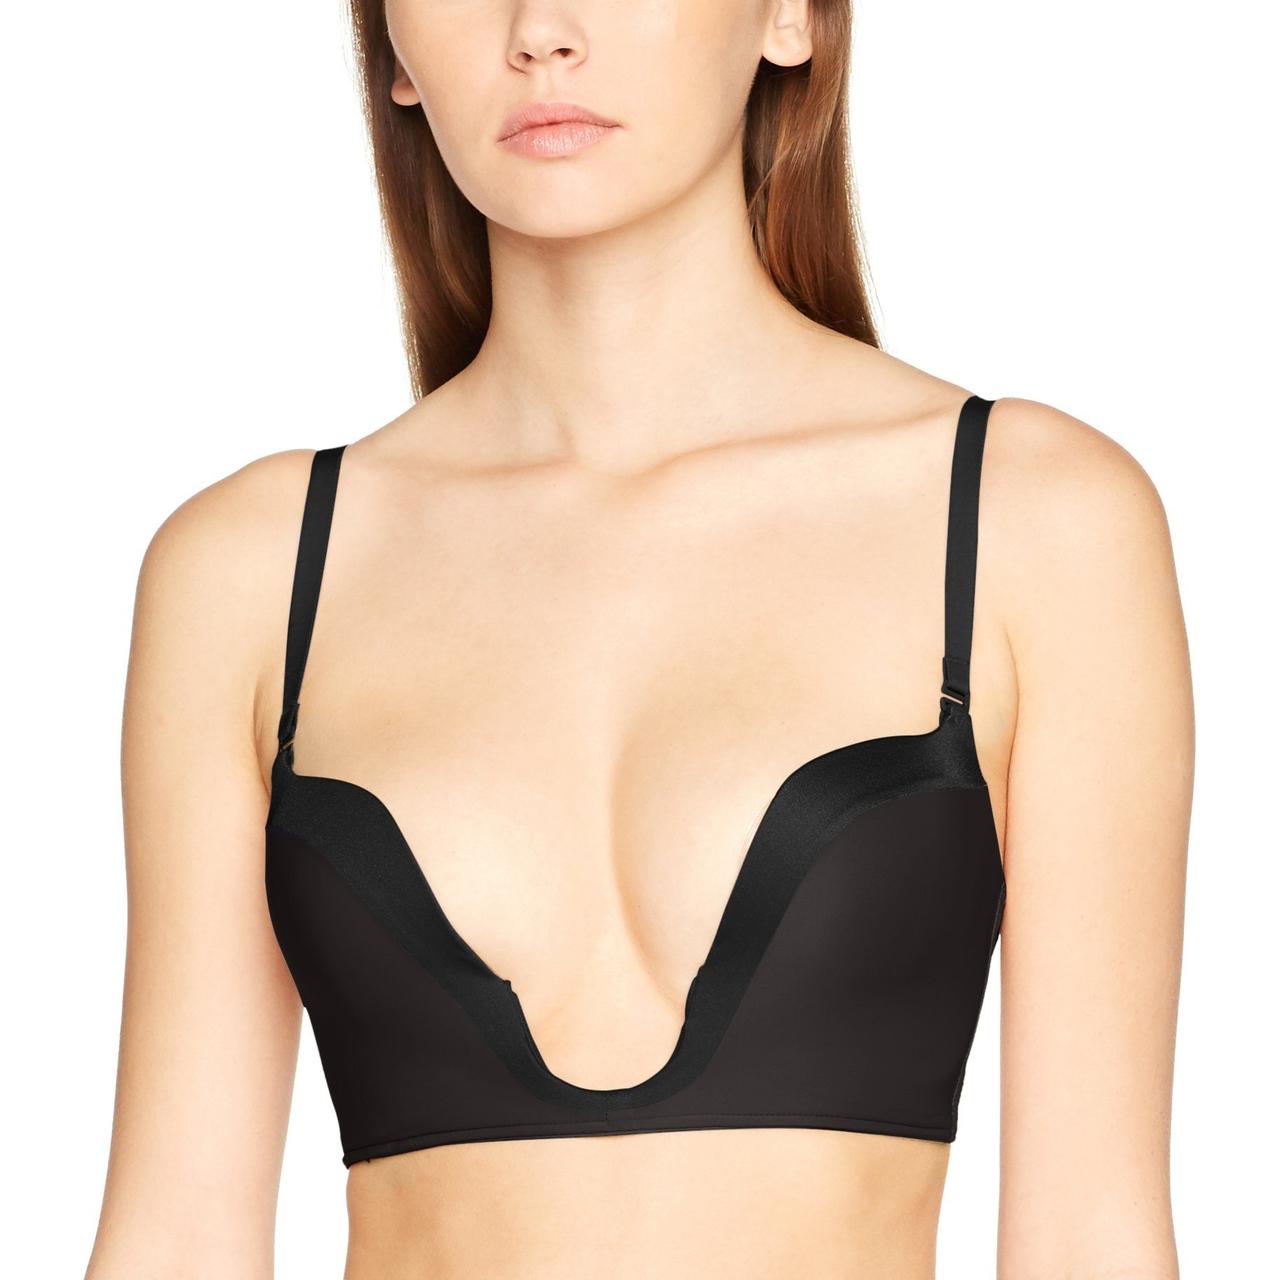 Nubra Feather Lite Adhesive Bra – And All That Jazz